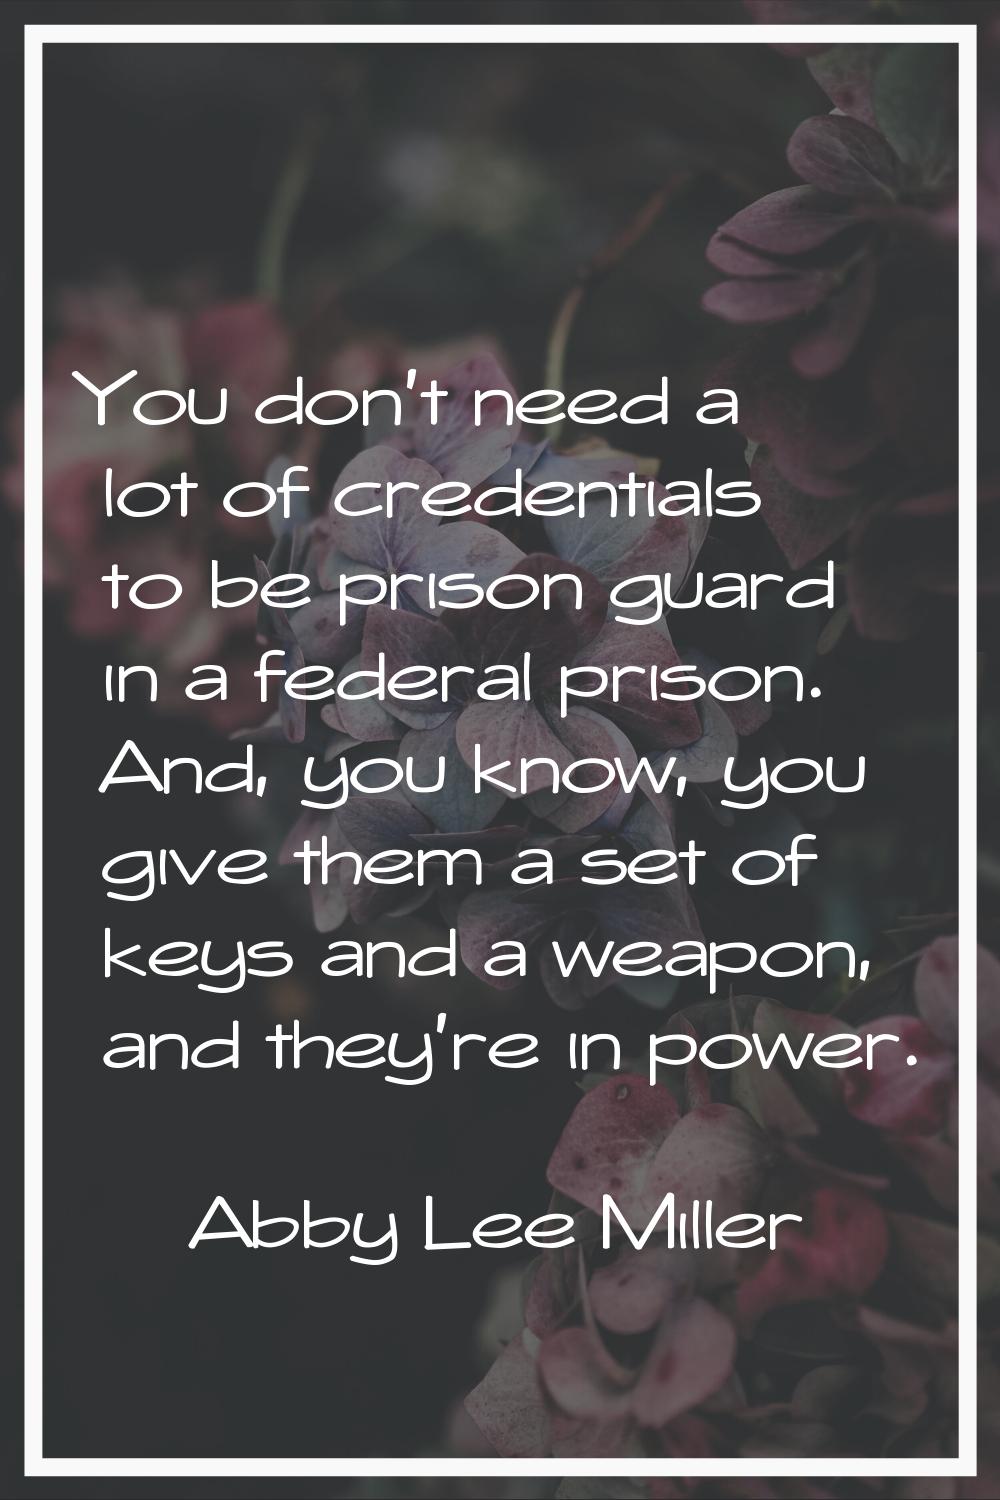 You don't need a lot of credentials to be prison guard in a federal prison. And, you know, you give